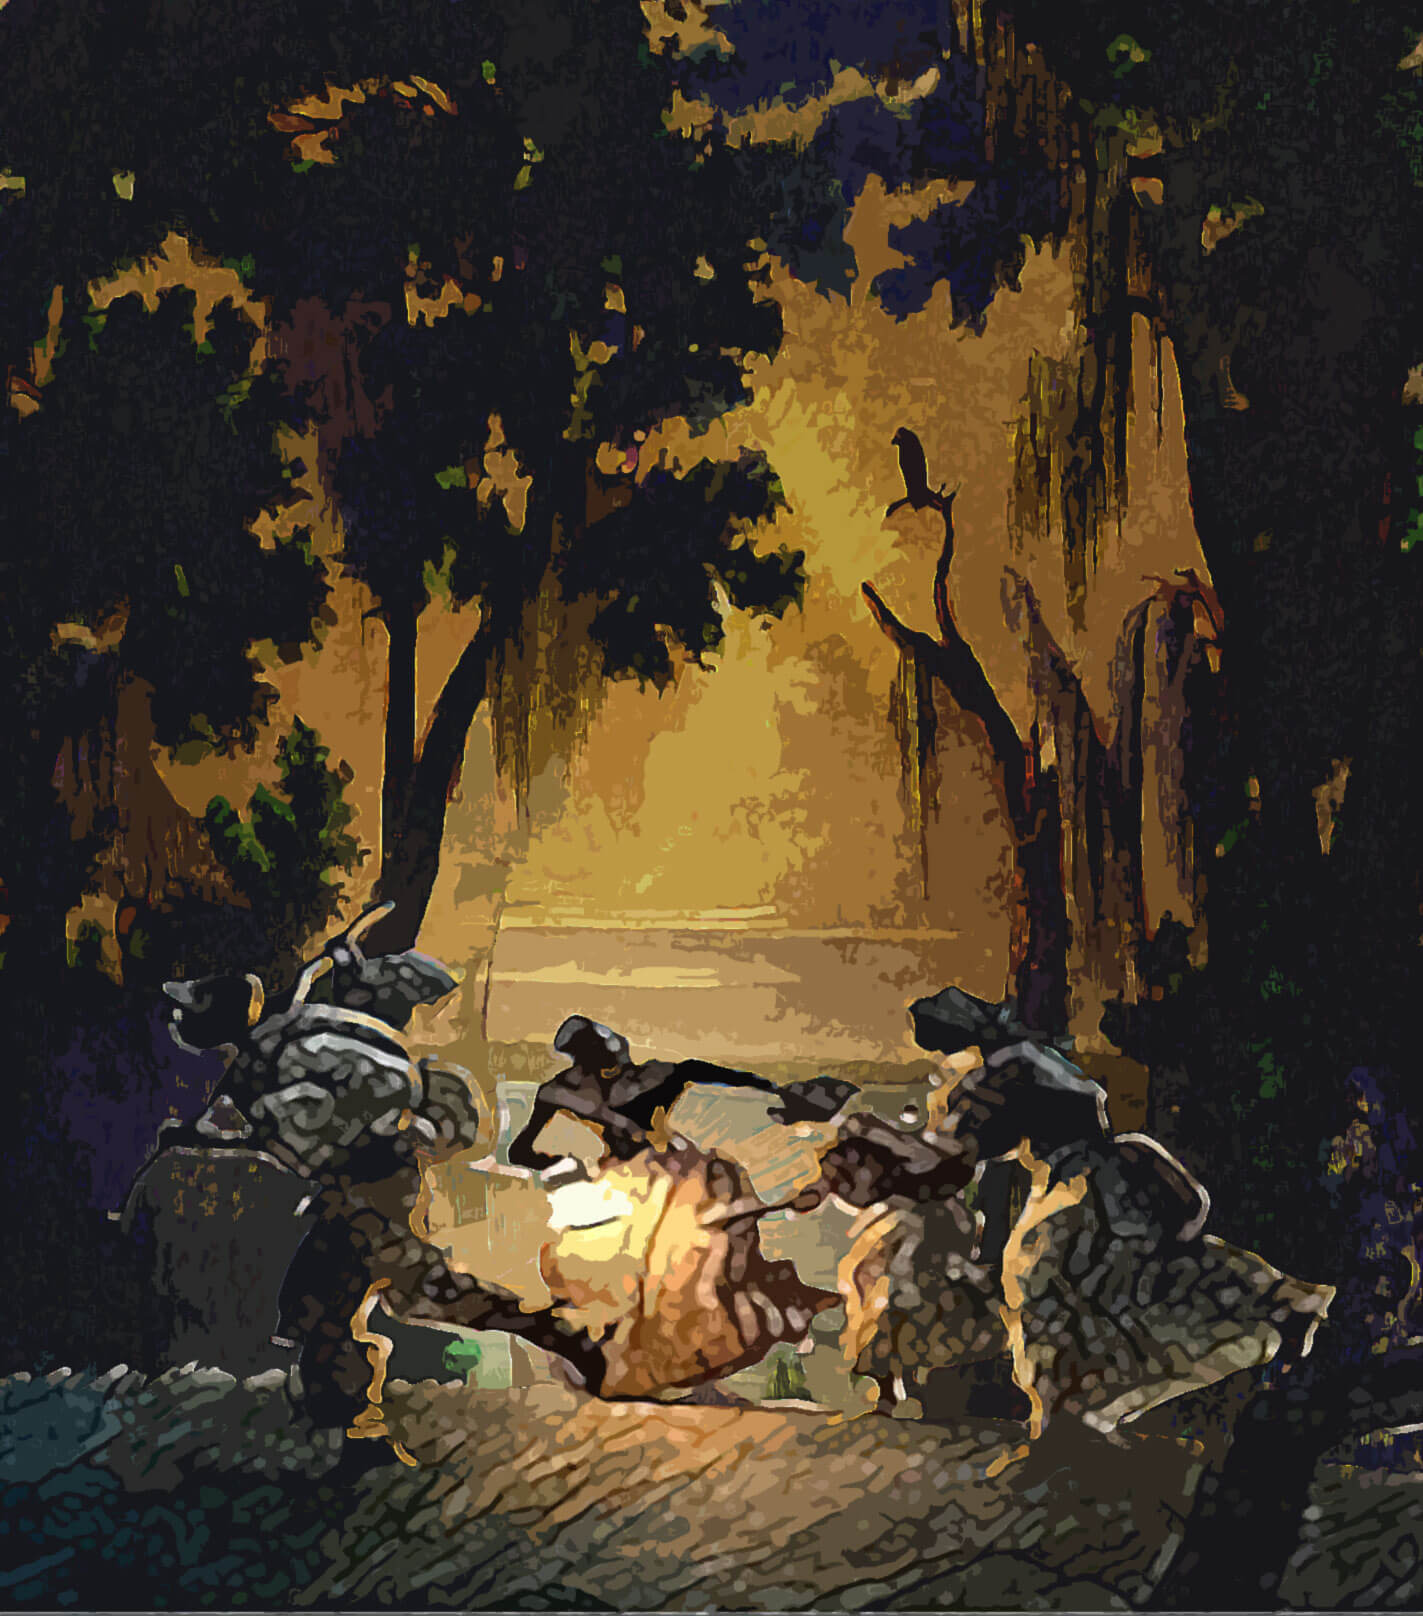 stylized artwork depicting slaves running through the swamp in the night